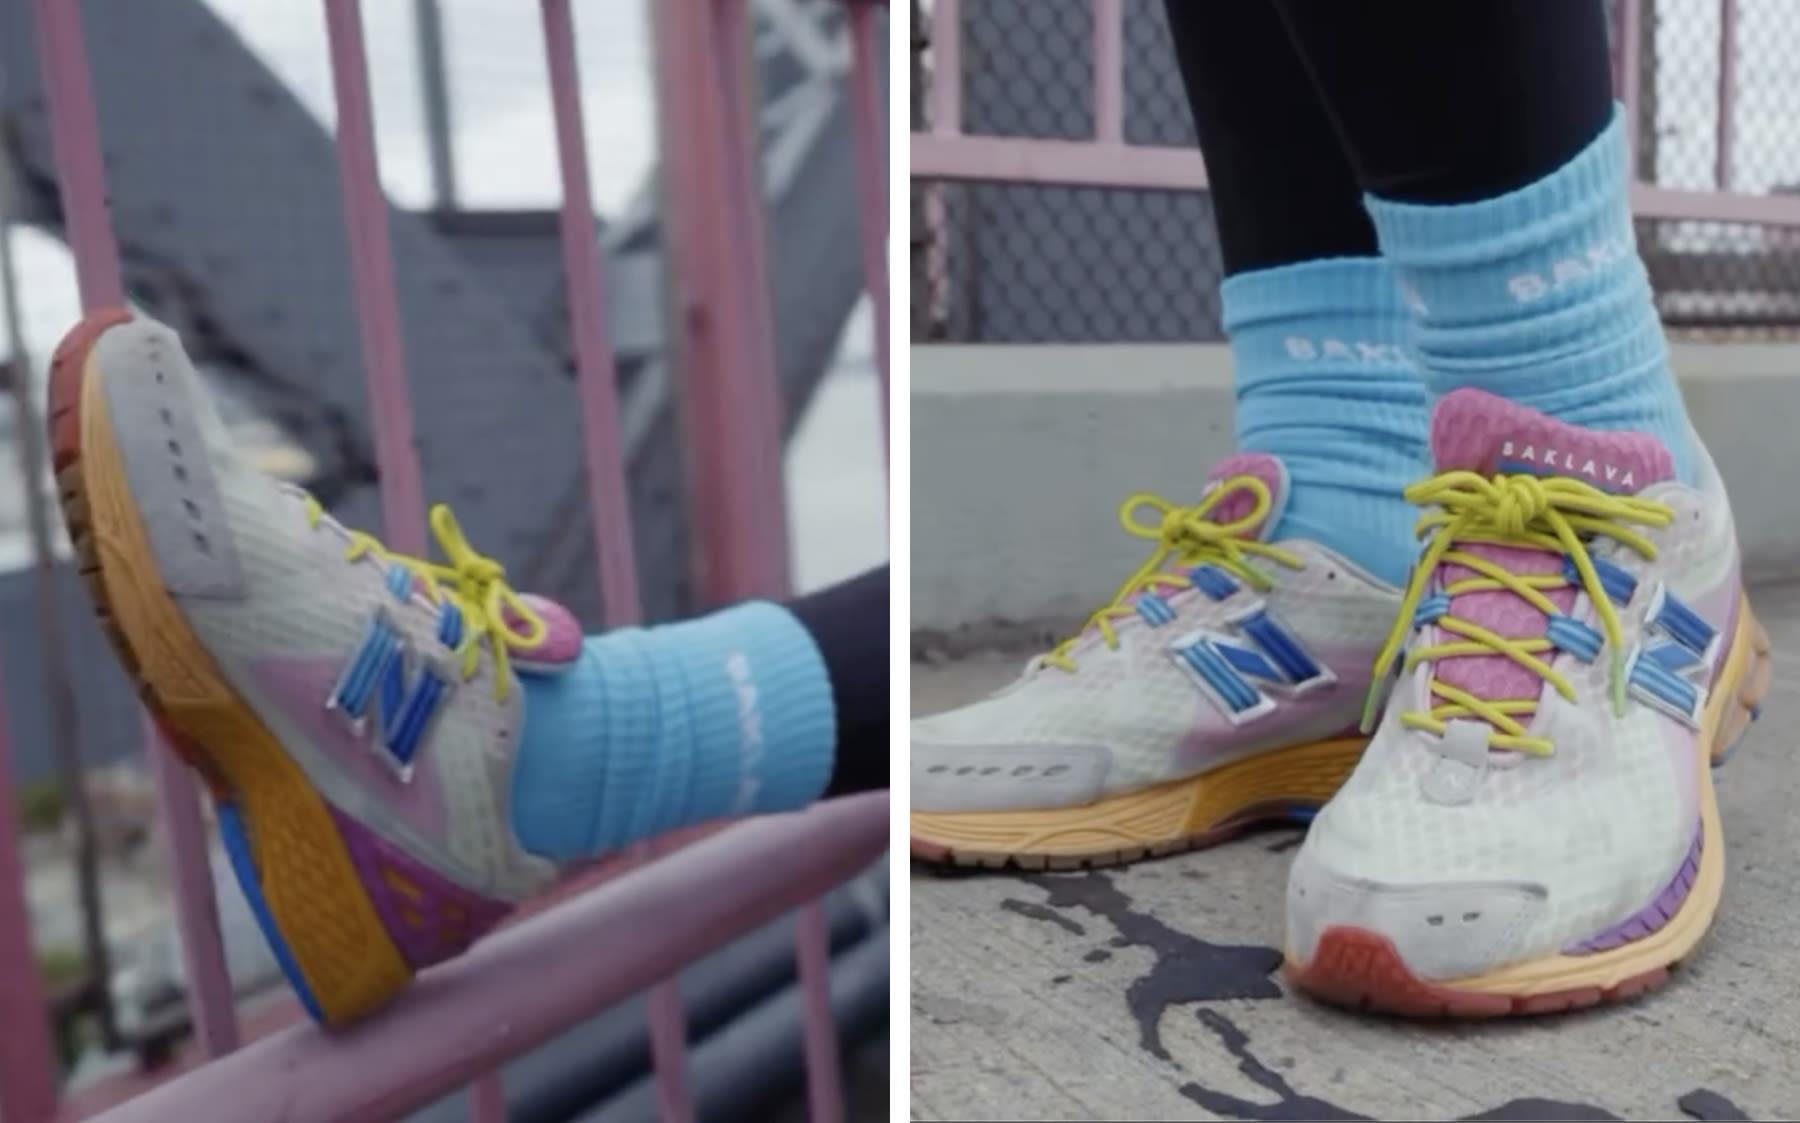 Action Bronson’s New Balance 1906R ‘Rosewater’ Sneaker Will Release This Week